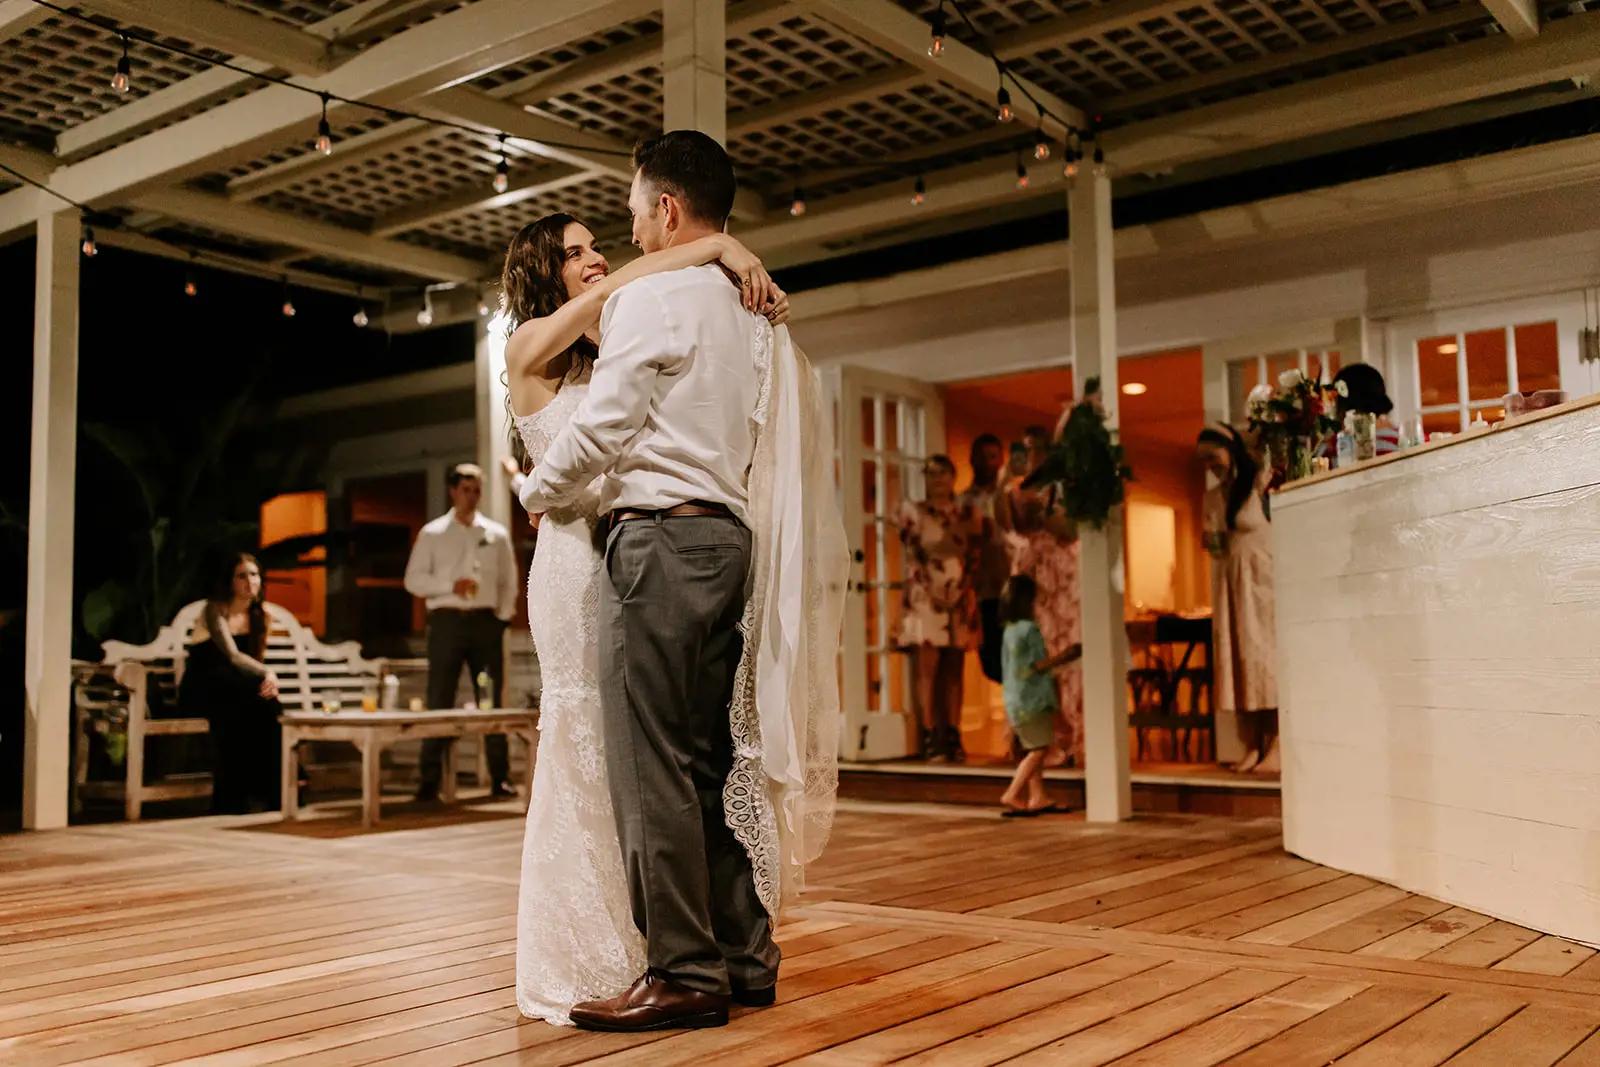 10 Classic First Dance Songs